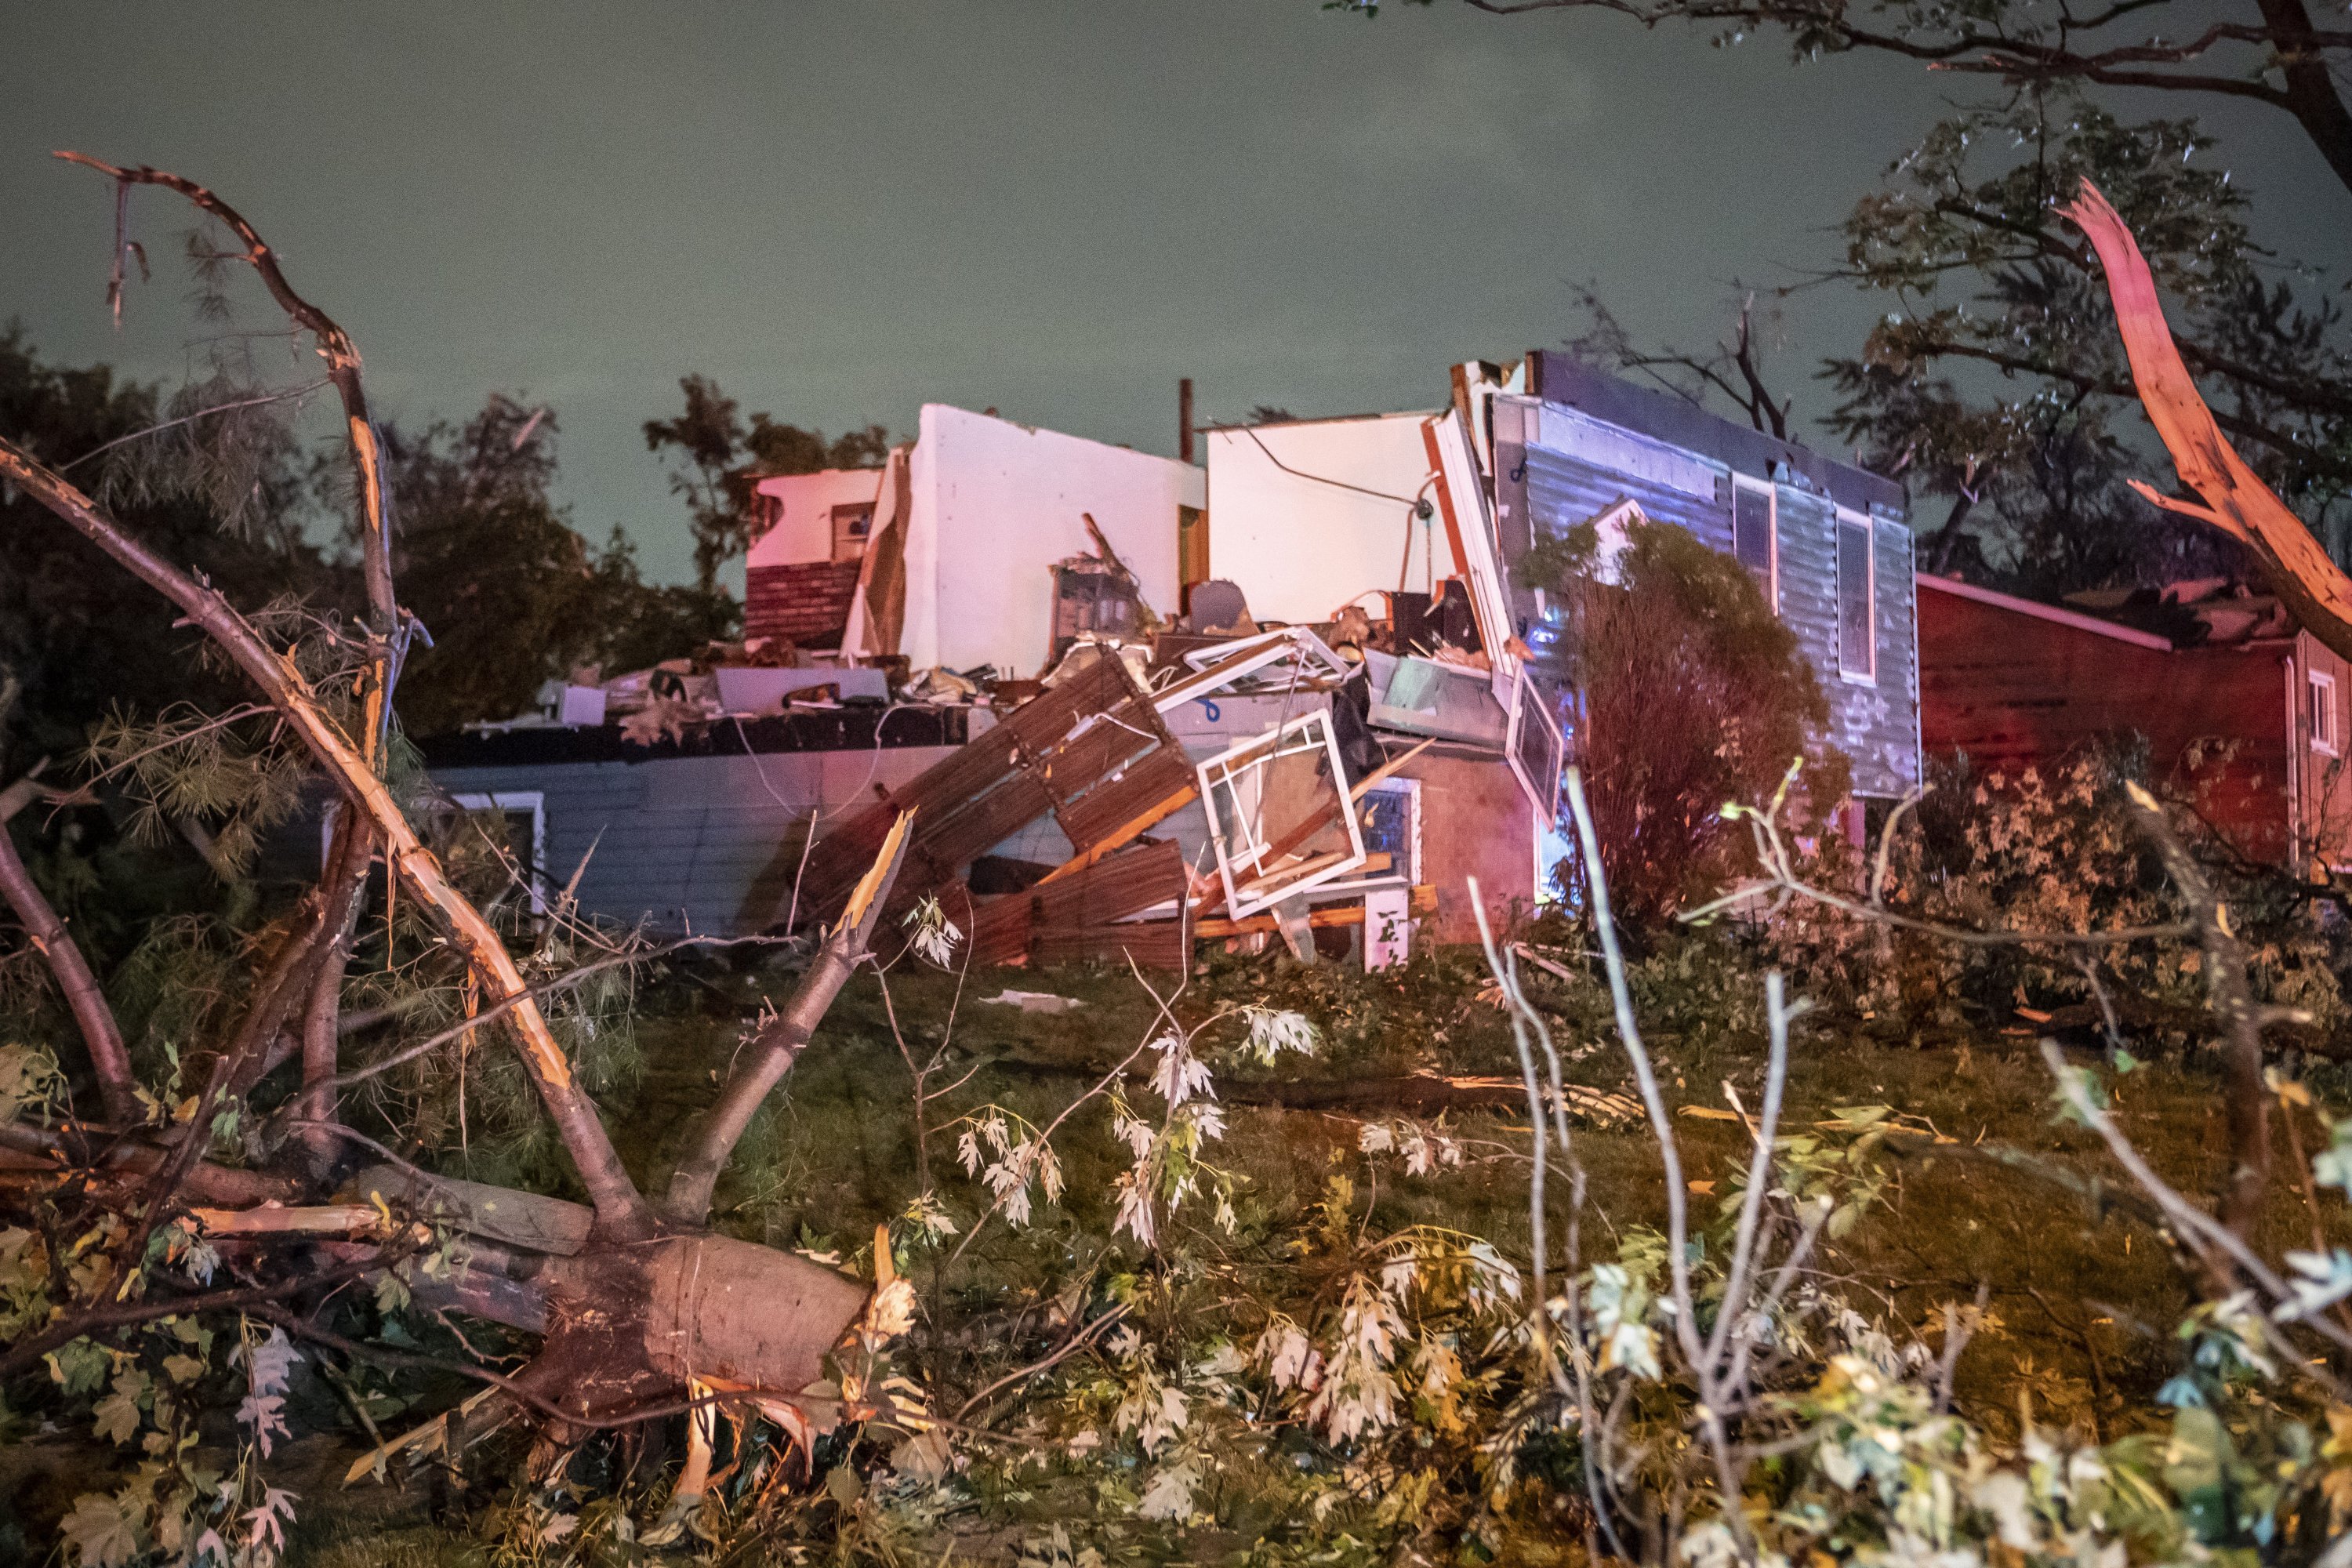 A home is damaged after a tornado swept through the area in Woodridge, Ill., Chicago, Chicago, the U.S., June 21, 2021. (AP Photo)